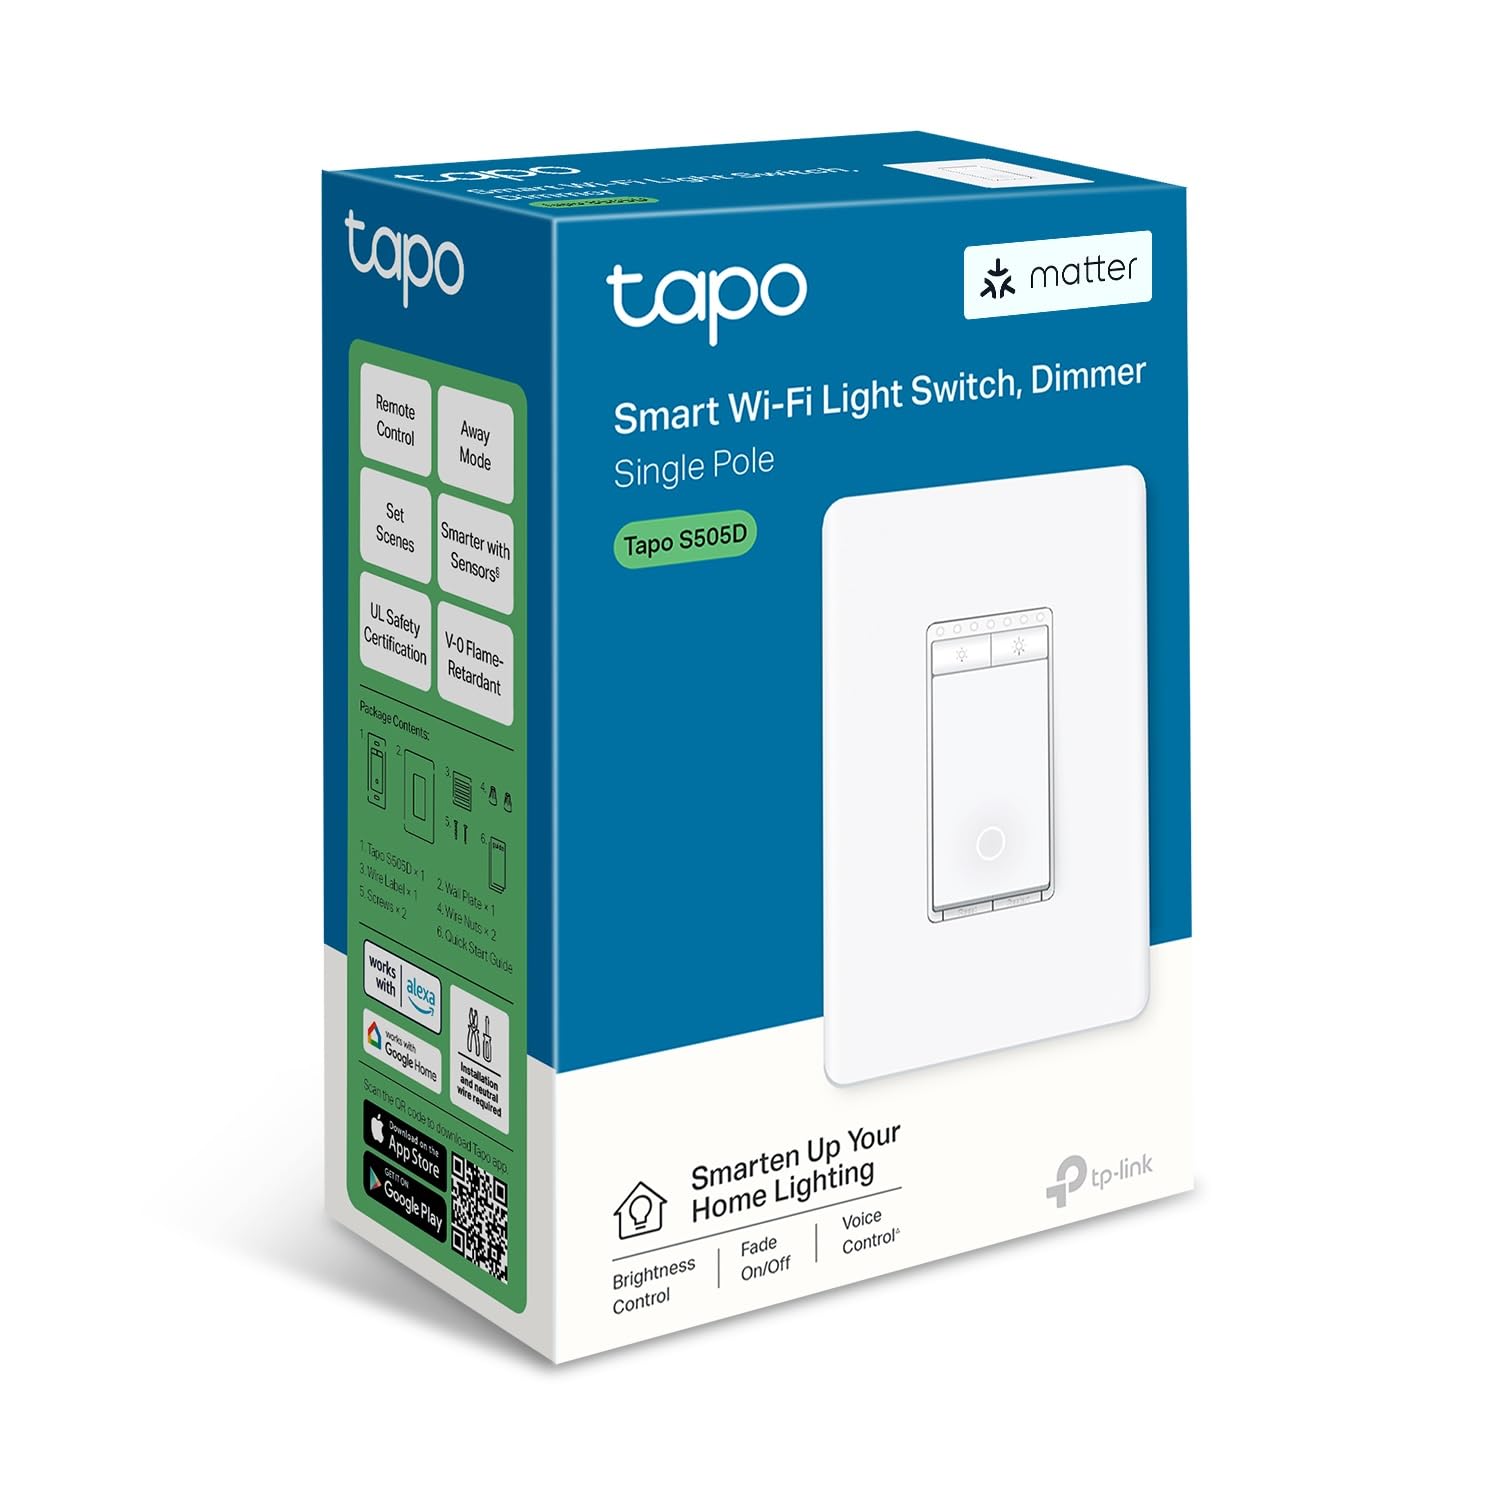 TP-Link's 1st Matter Smart Dimmer Switch Single Pole Tapo S505D